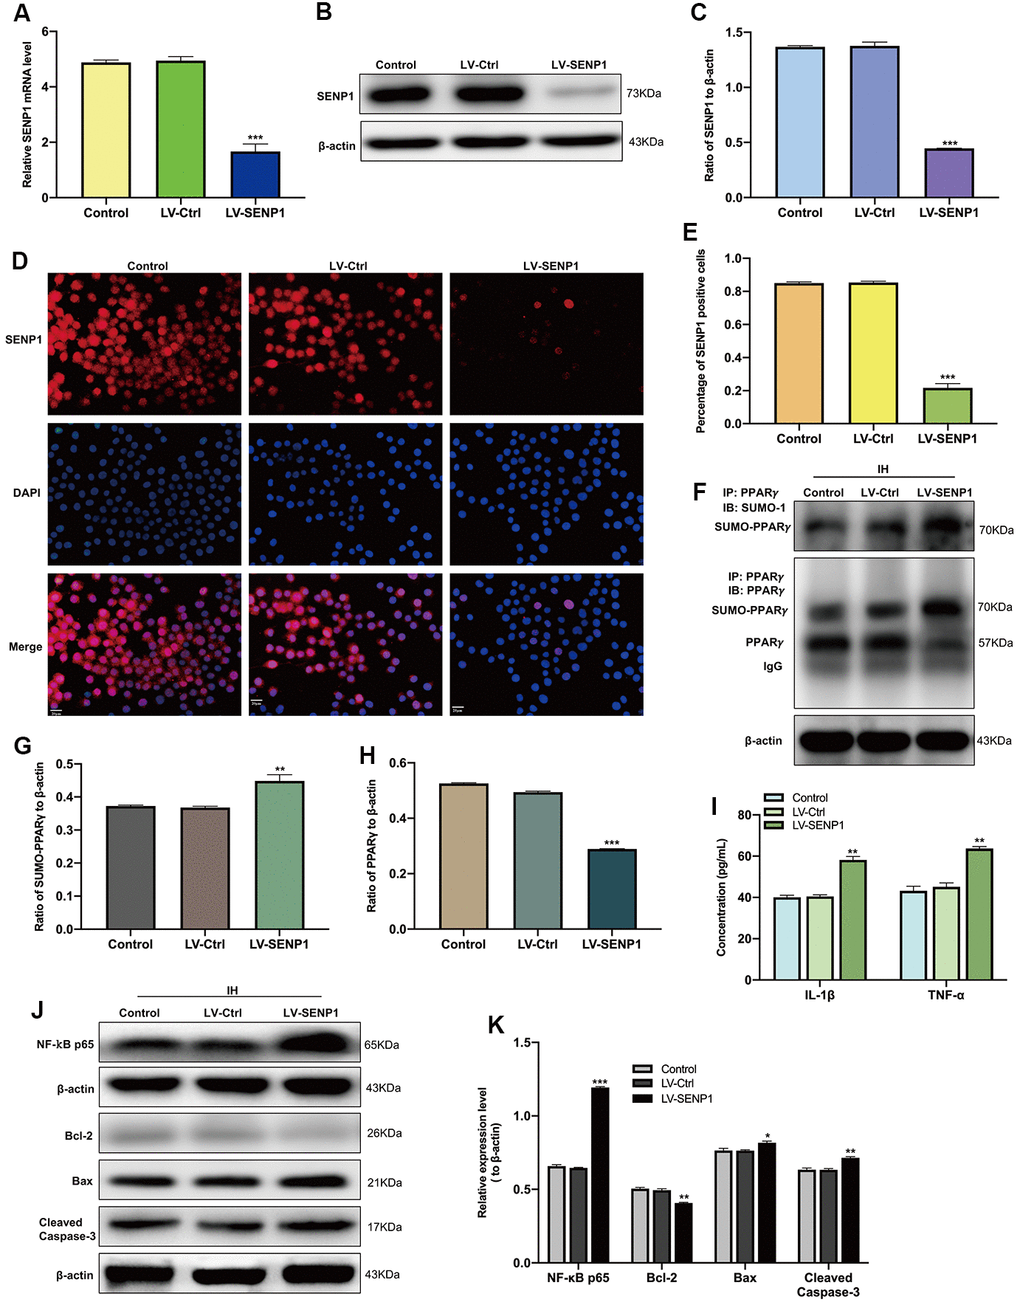 SENP1 depletion promotes the SUMOylation of peroxisome proliferator-activated receptor-γ (PPARγ) in BV-2 cells and neuronal apoptosis under intermittent hypoxia (IH) condition. (A) The qRT-PCR, (B, C) western blot analysis, and (D) cellular immunofluorescence analysis showed the downregulation of SENP1 in BV-2 cells after transfection. Untreated BV-2 cells were used as controls. Scale bar, 20 μm. ***p E) Data are presented as the percentage of SENP1 positive BV-2 cells. ***p F–H) The effects of IH on the SUMOylation of PPARγ (F, G) and the level of PPARγ (F, H) were detected by co-immunoprecipitation followed by western blot analysis. **p p I) The expression of IL-1β and TNF-α in BV-2 cells with or without SENP1 knockdown under IH condition were detected using ELISA. ***p J, K) The expression of NF-κB p65 in BV-2 cells and Bcl-2, Bax, Cleaved caspase-3 in HT-22 cells were detected by western blot analysis. *p p p 